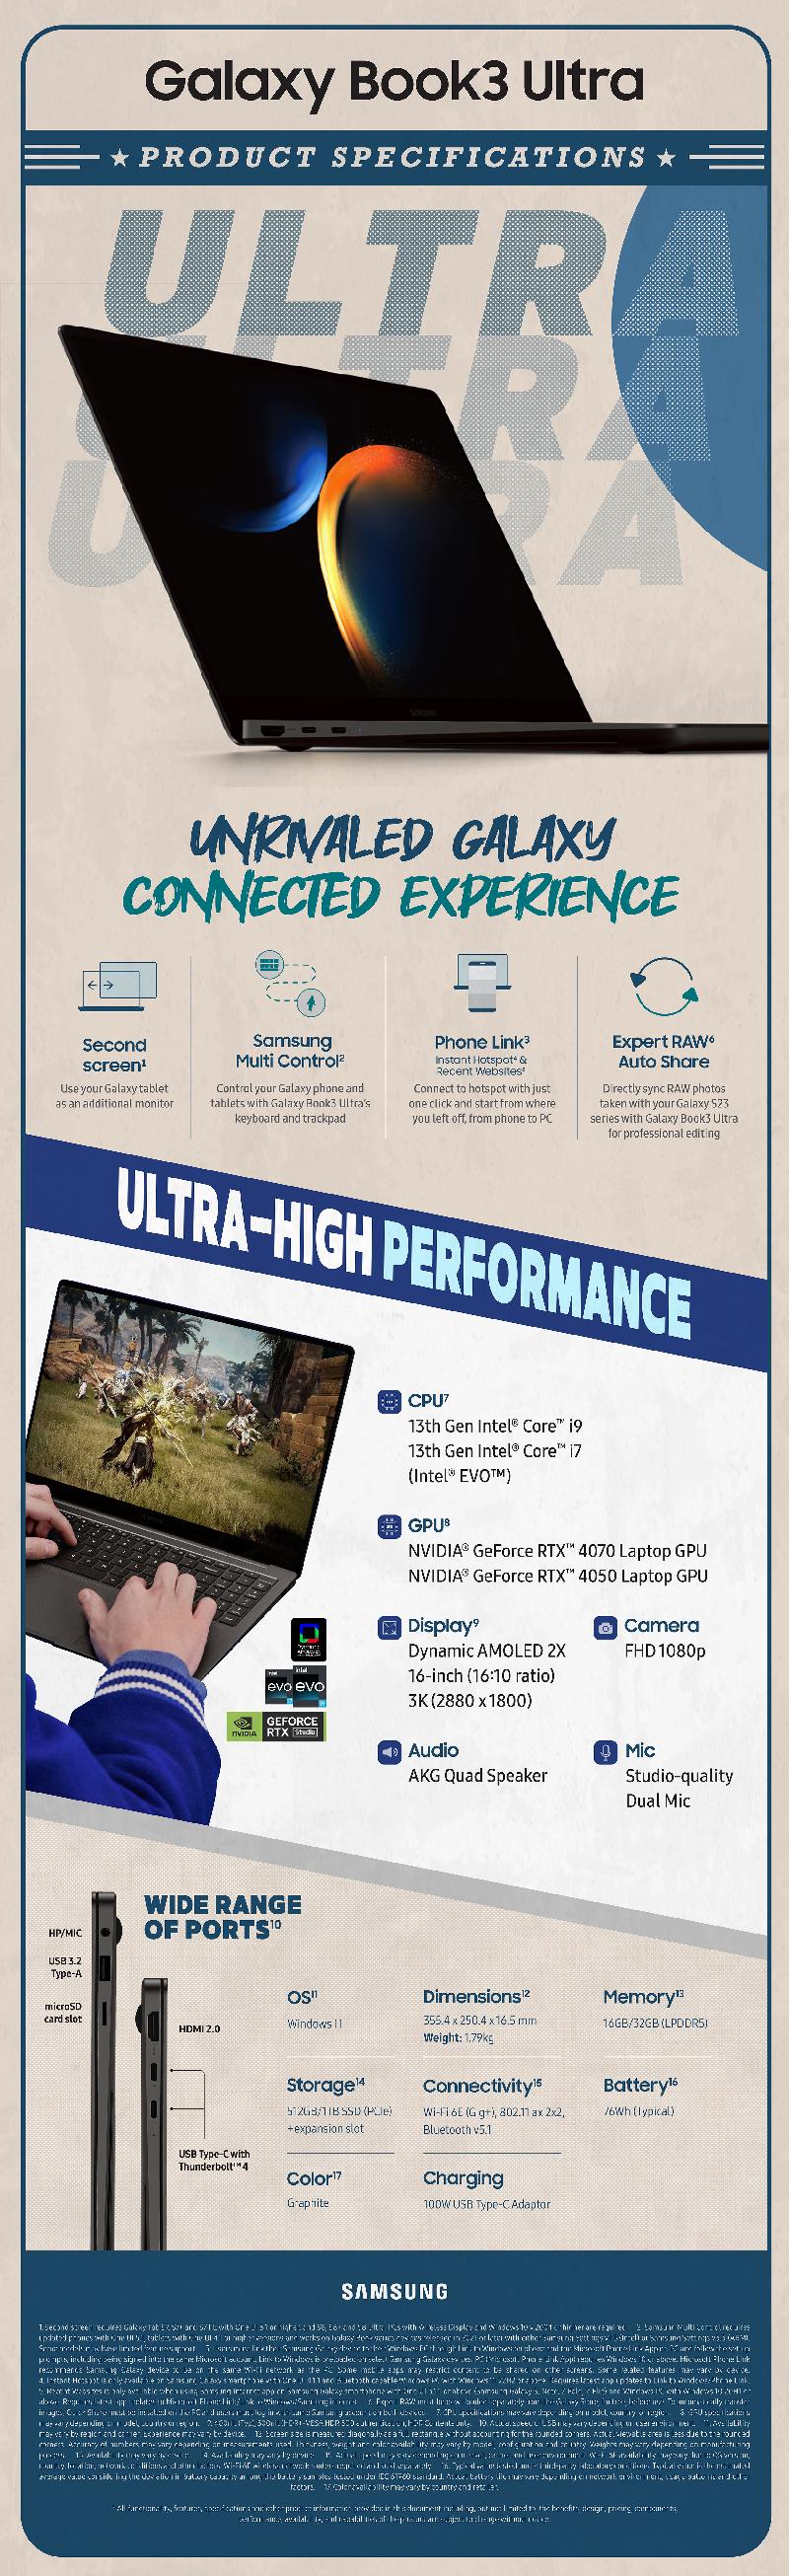 Galaxy_Book3_Ultra_Infographic_Product Specifications.jpg